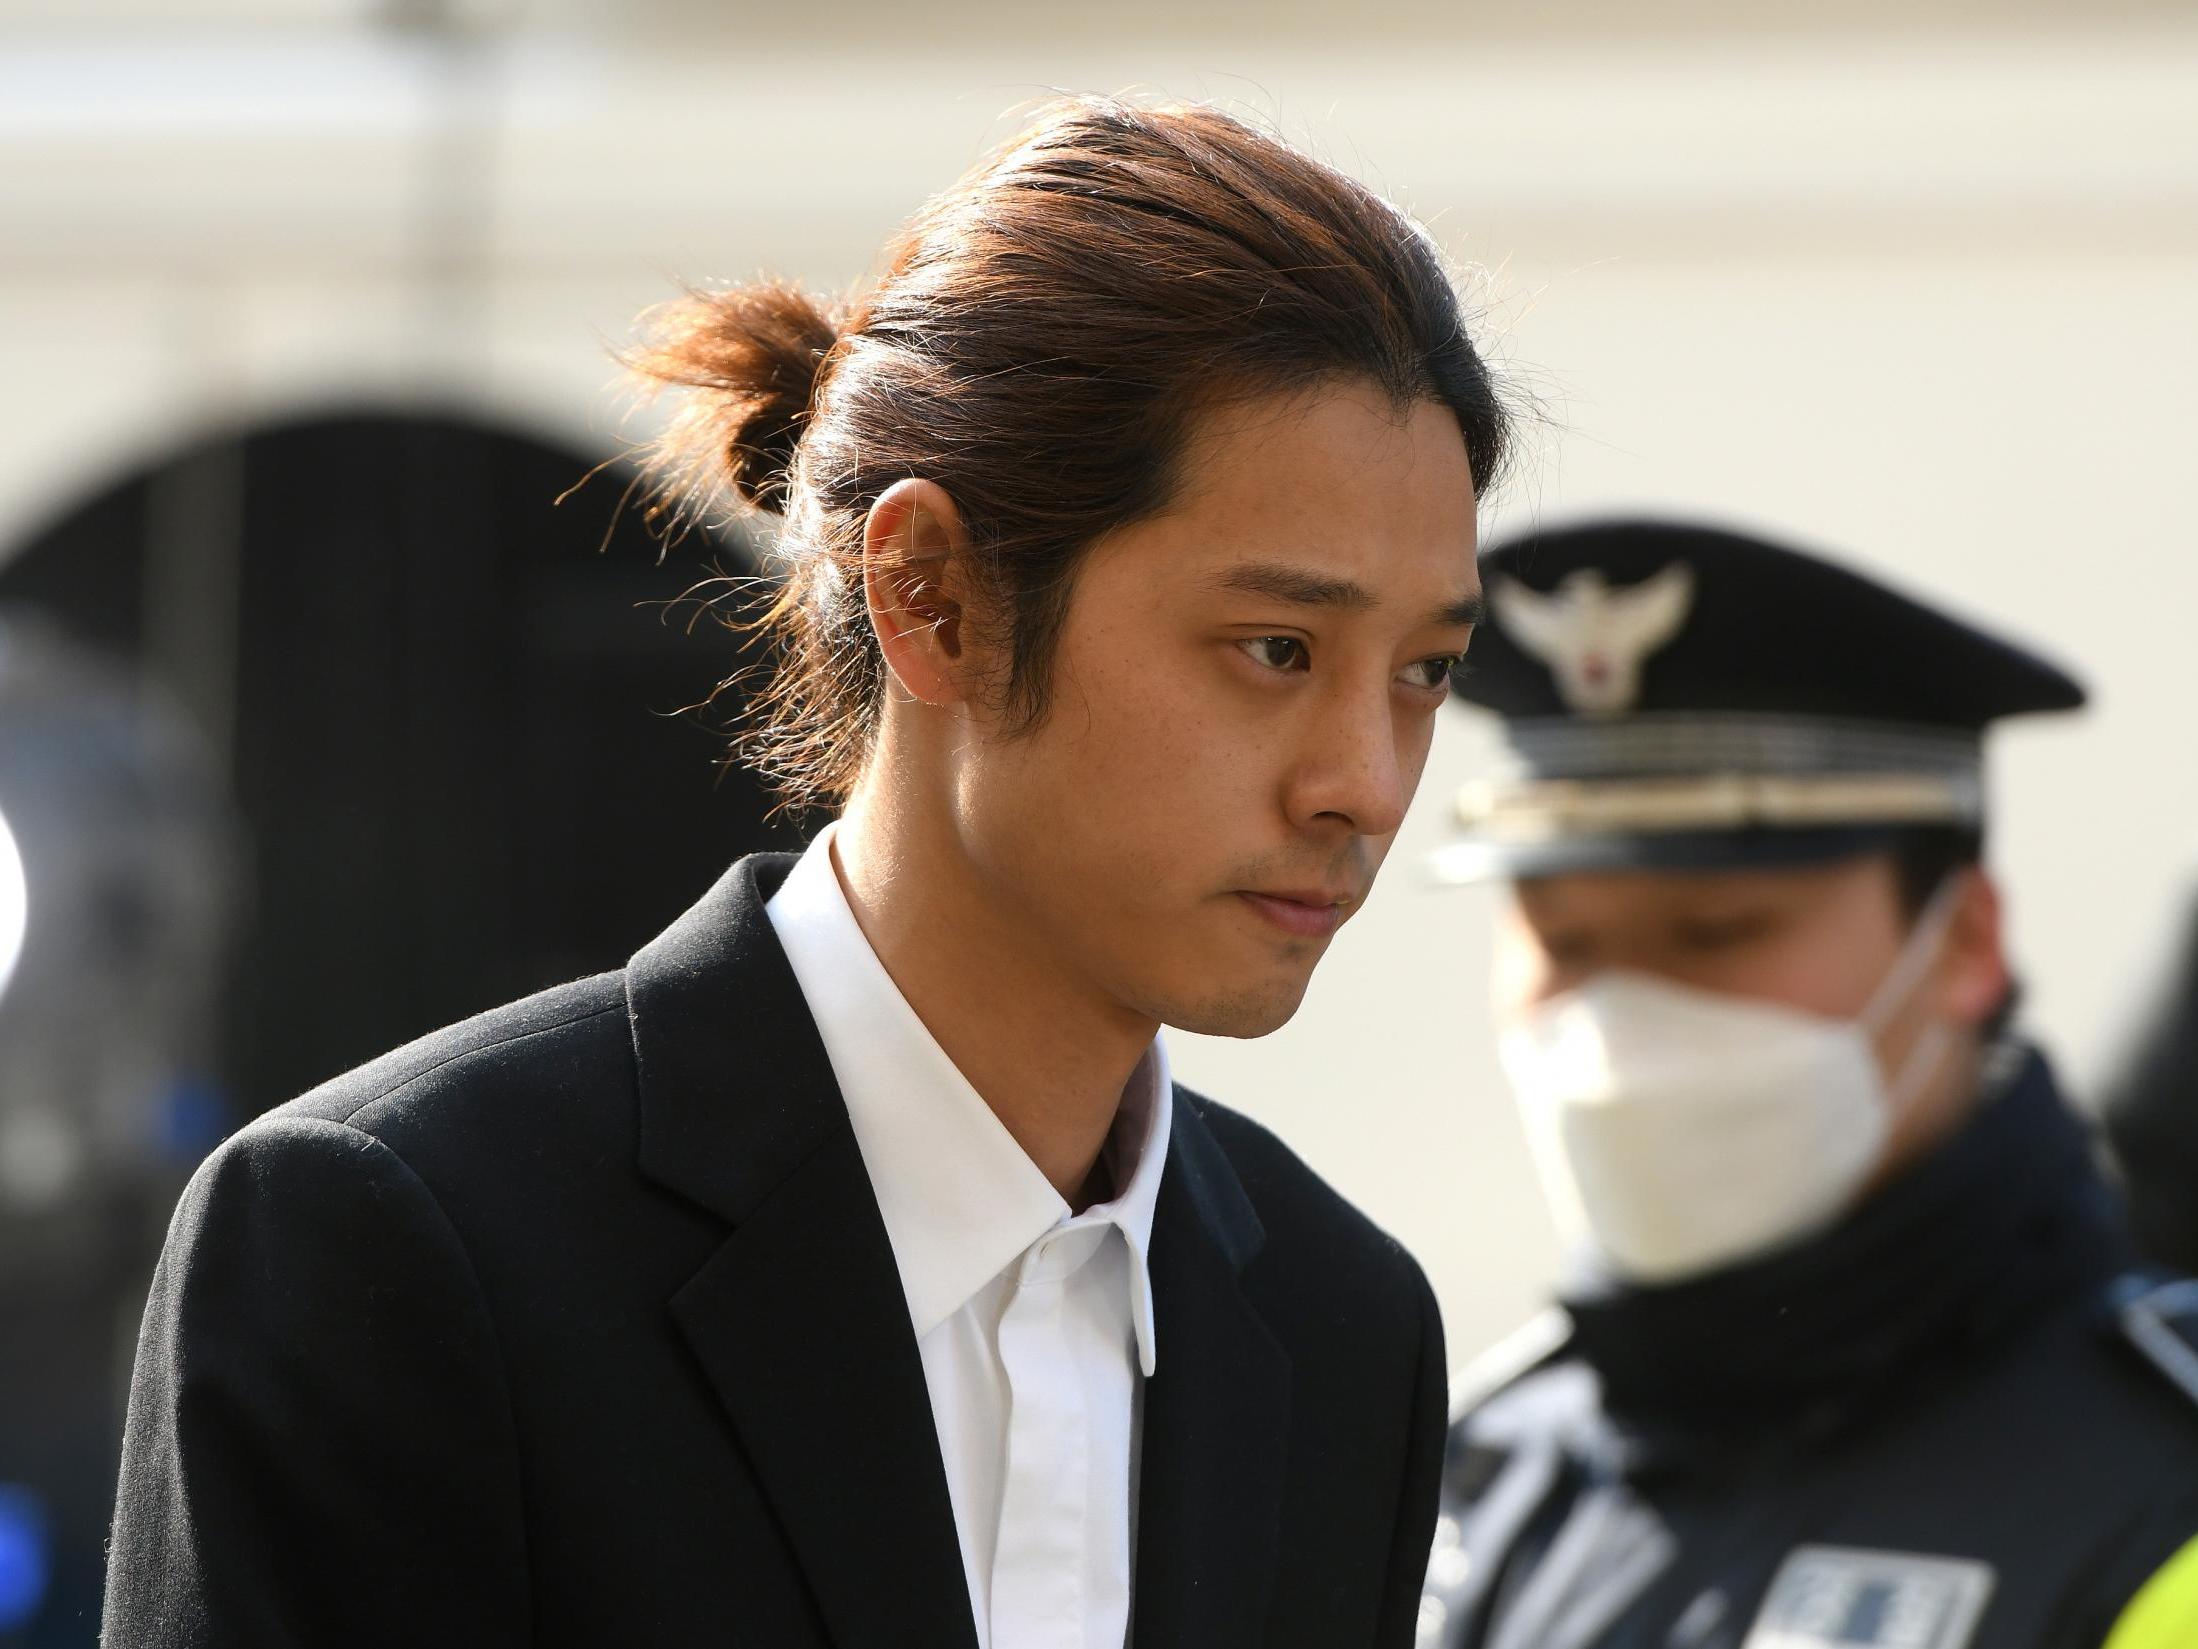 K-pop star Jung Joon-young arrives for questioning at the Seoul Metropolitan Police Agency in Seoul on March 14, 2019